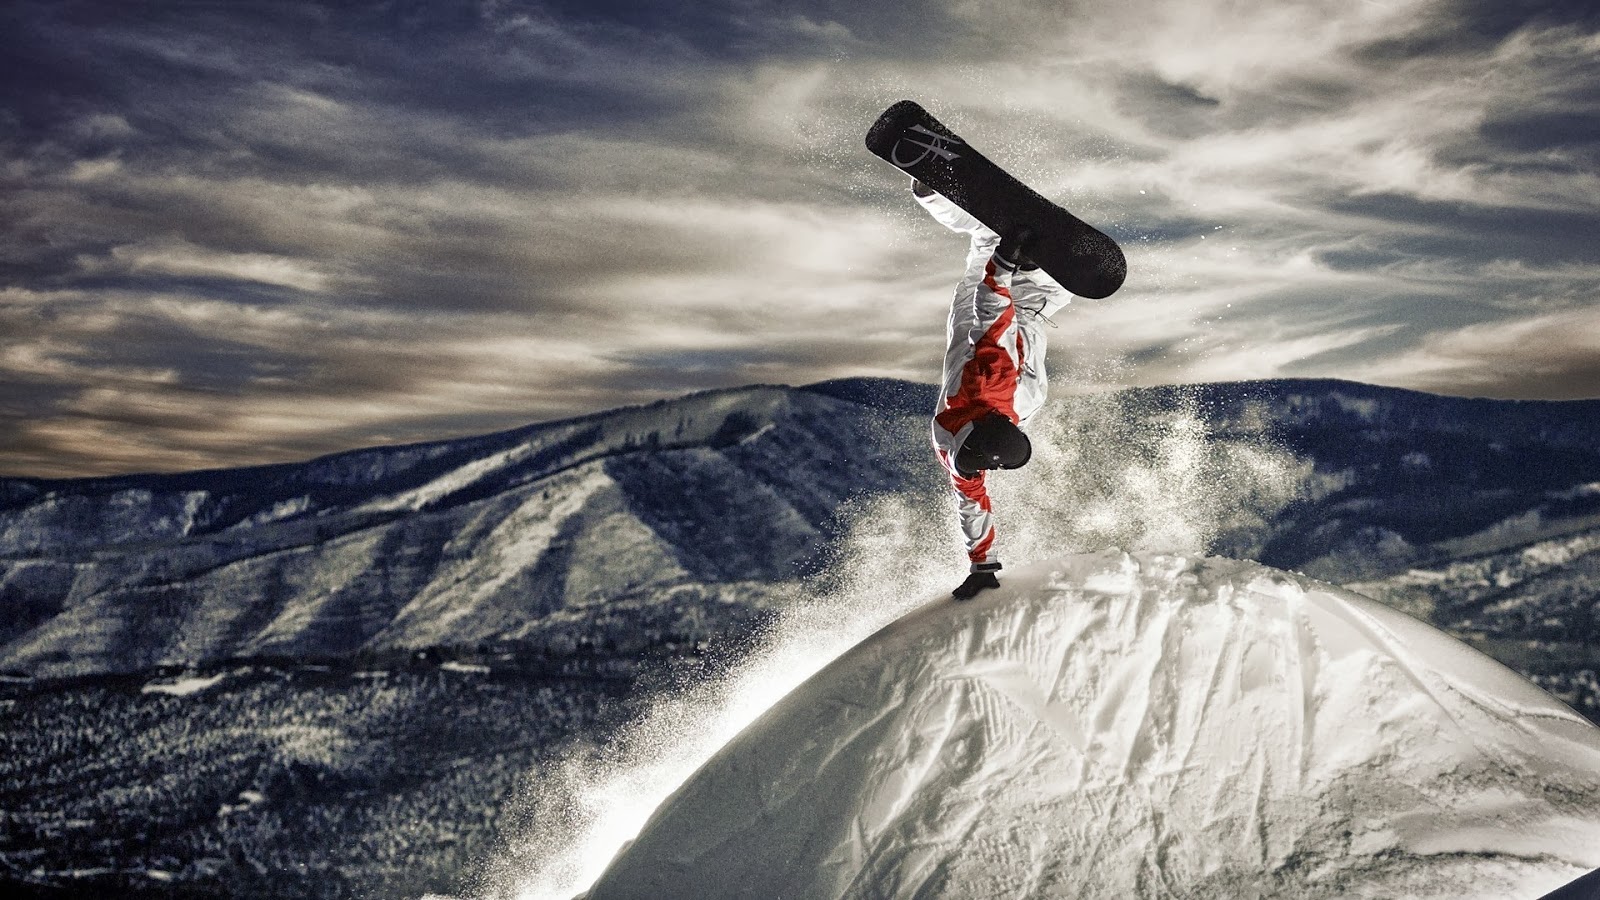 Best Snowboarding Wallpaper From Past Years